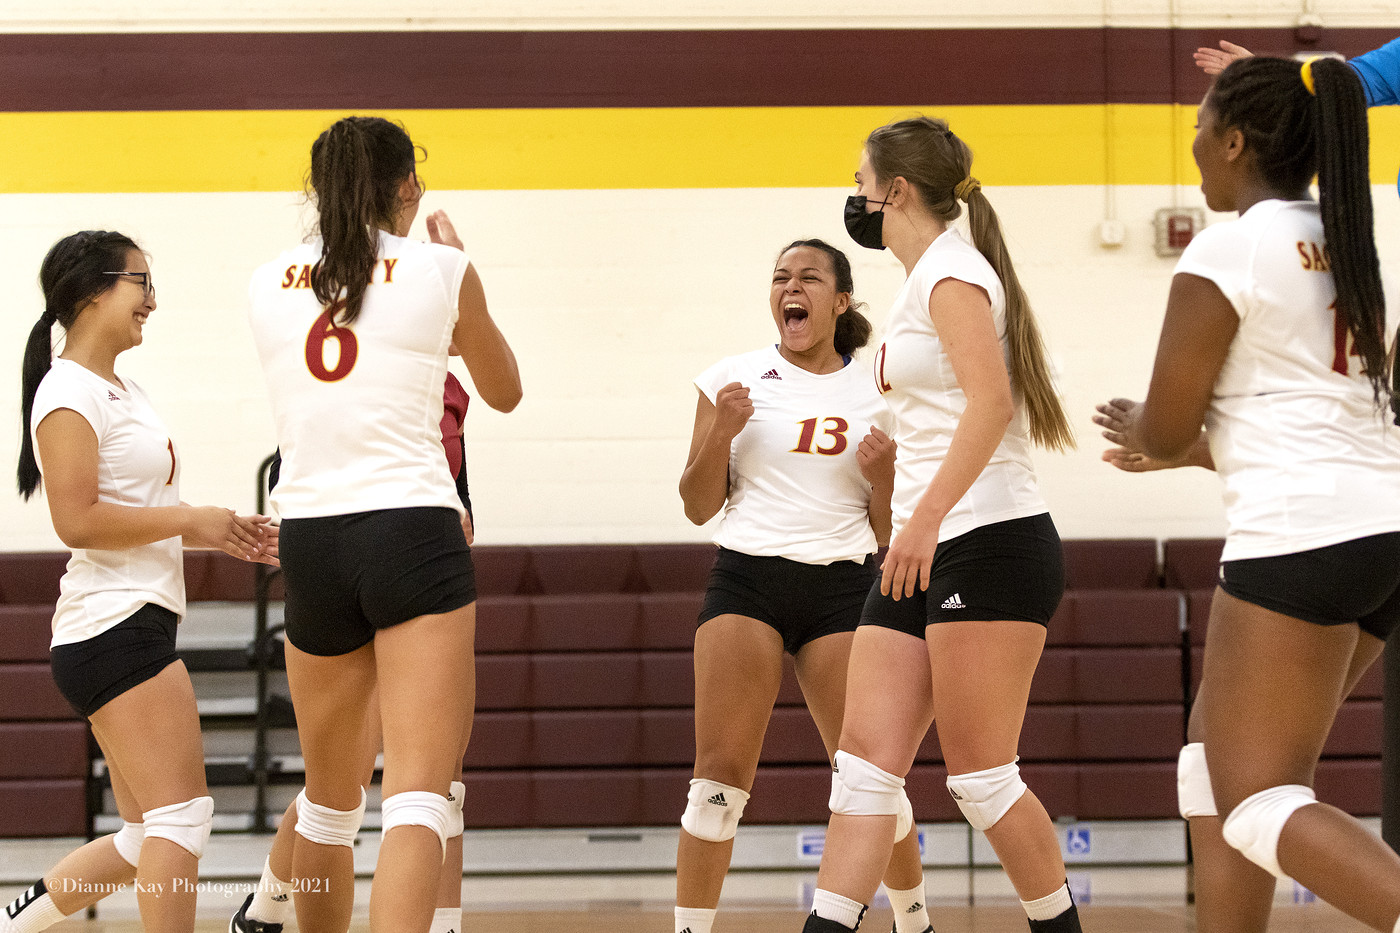 Sac City sweeps the Vikings 3-0 (25-21, 25-17, 25-12) to extend their winning streak to 3 games